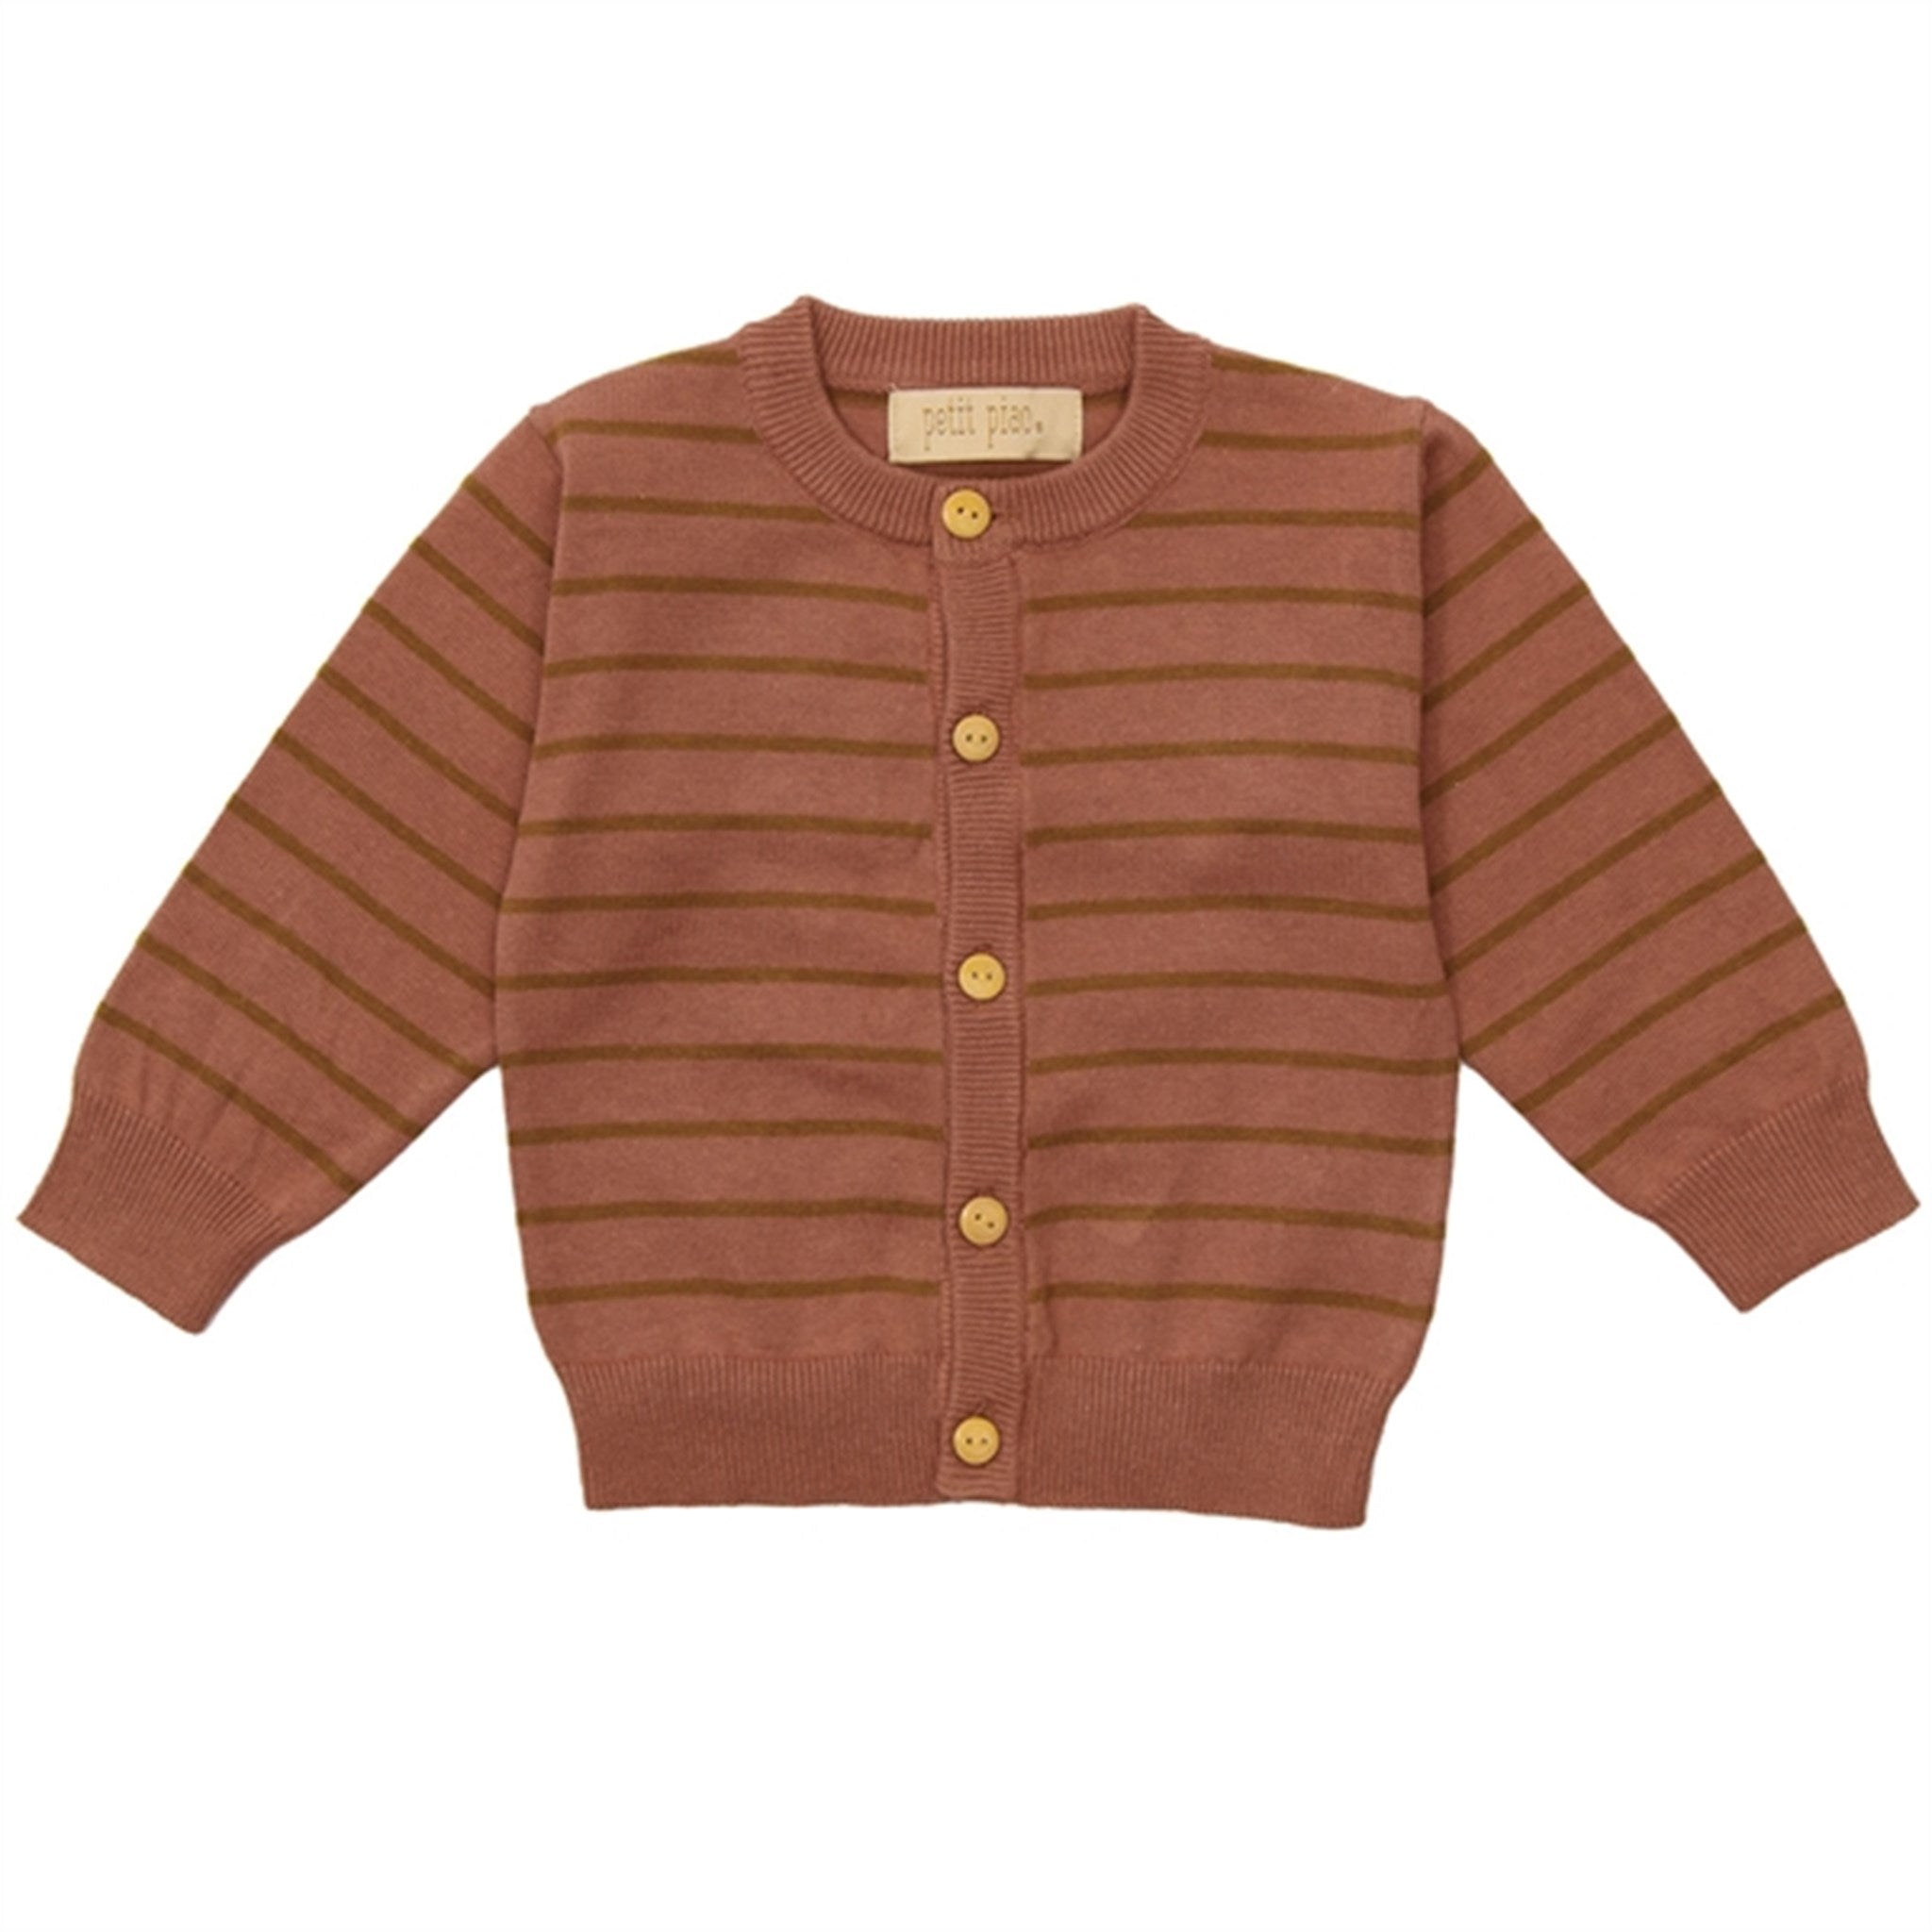 Petit Piao Copper Brown/Rubber Striped Knit Cardigan